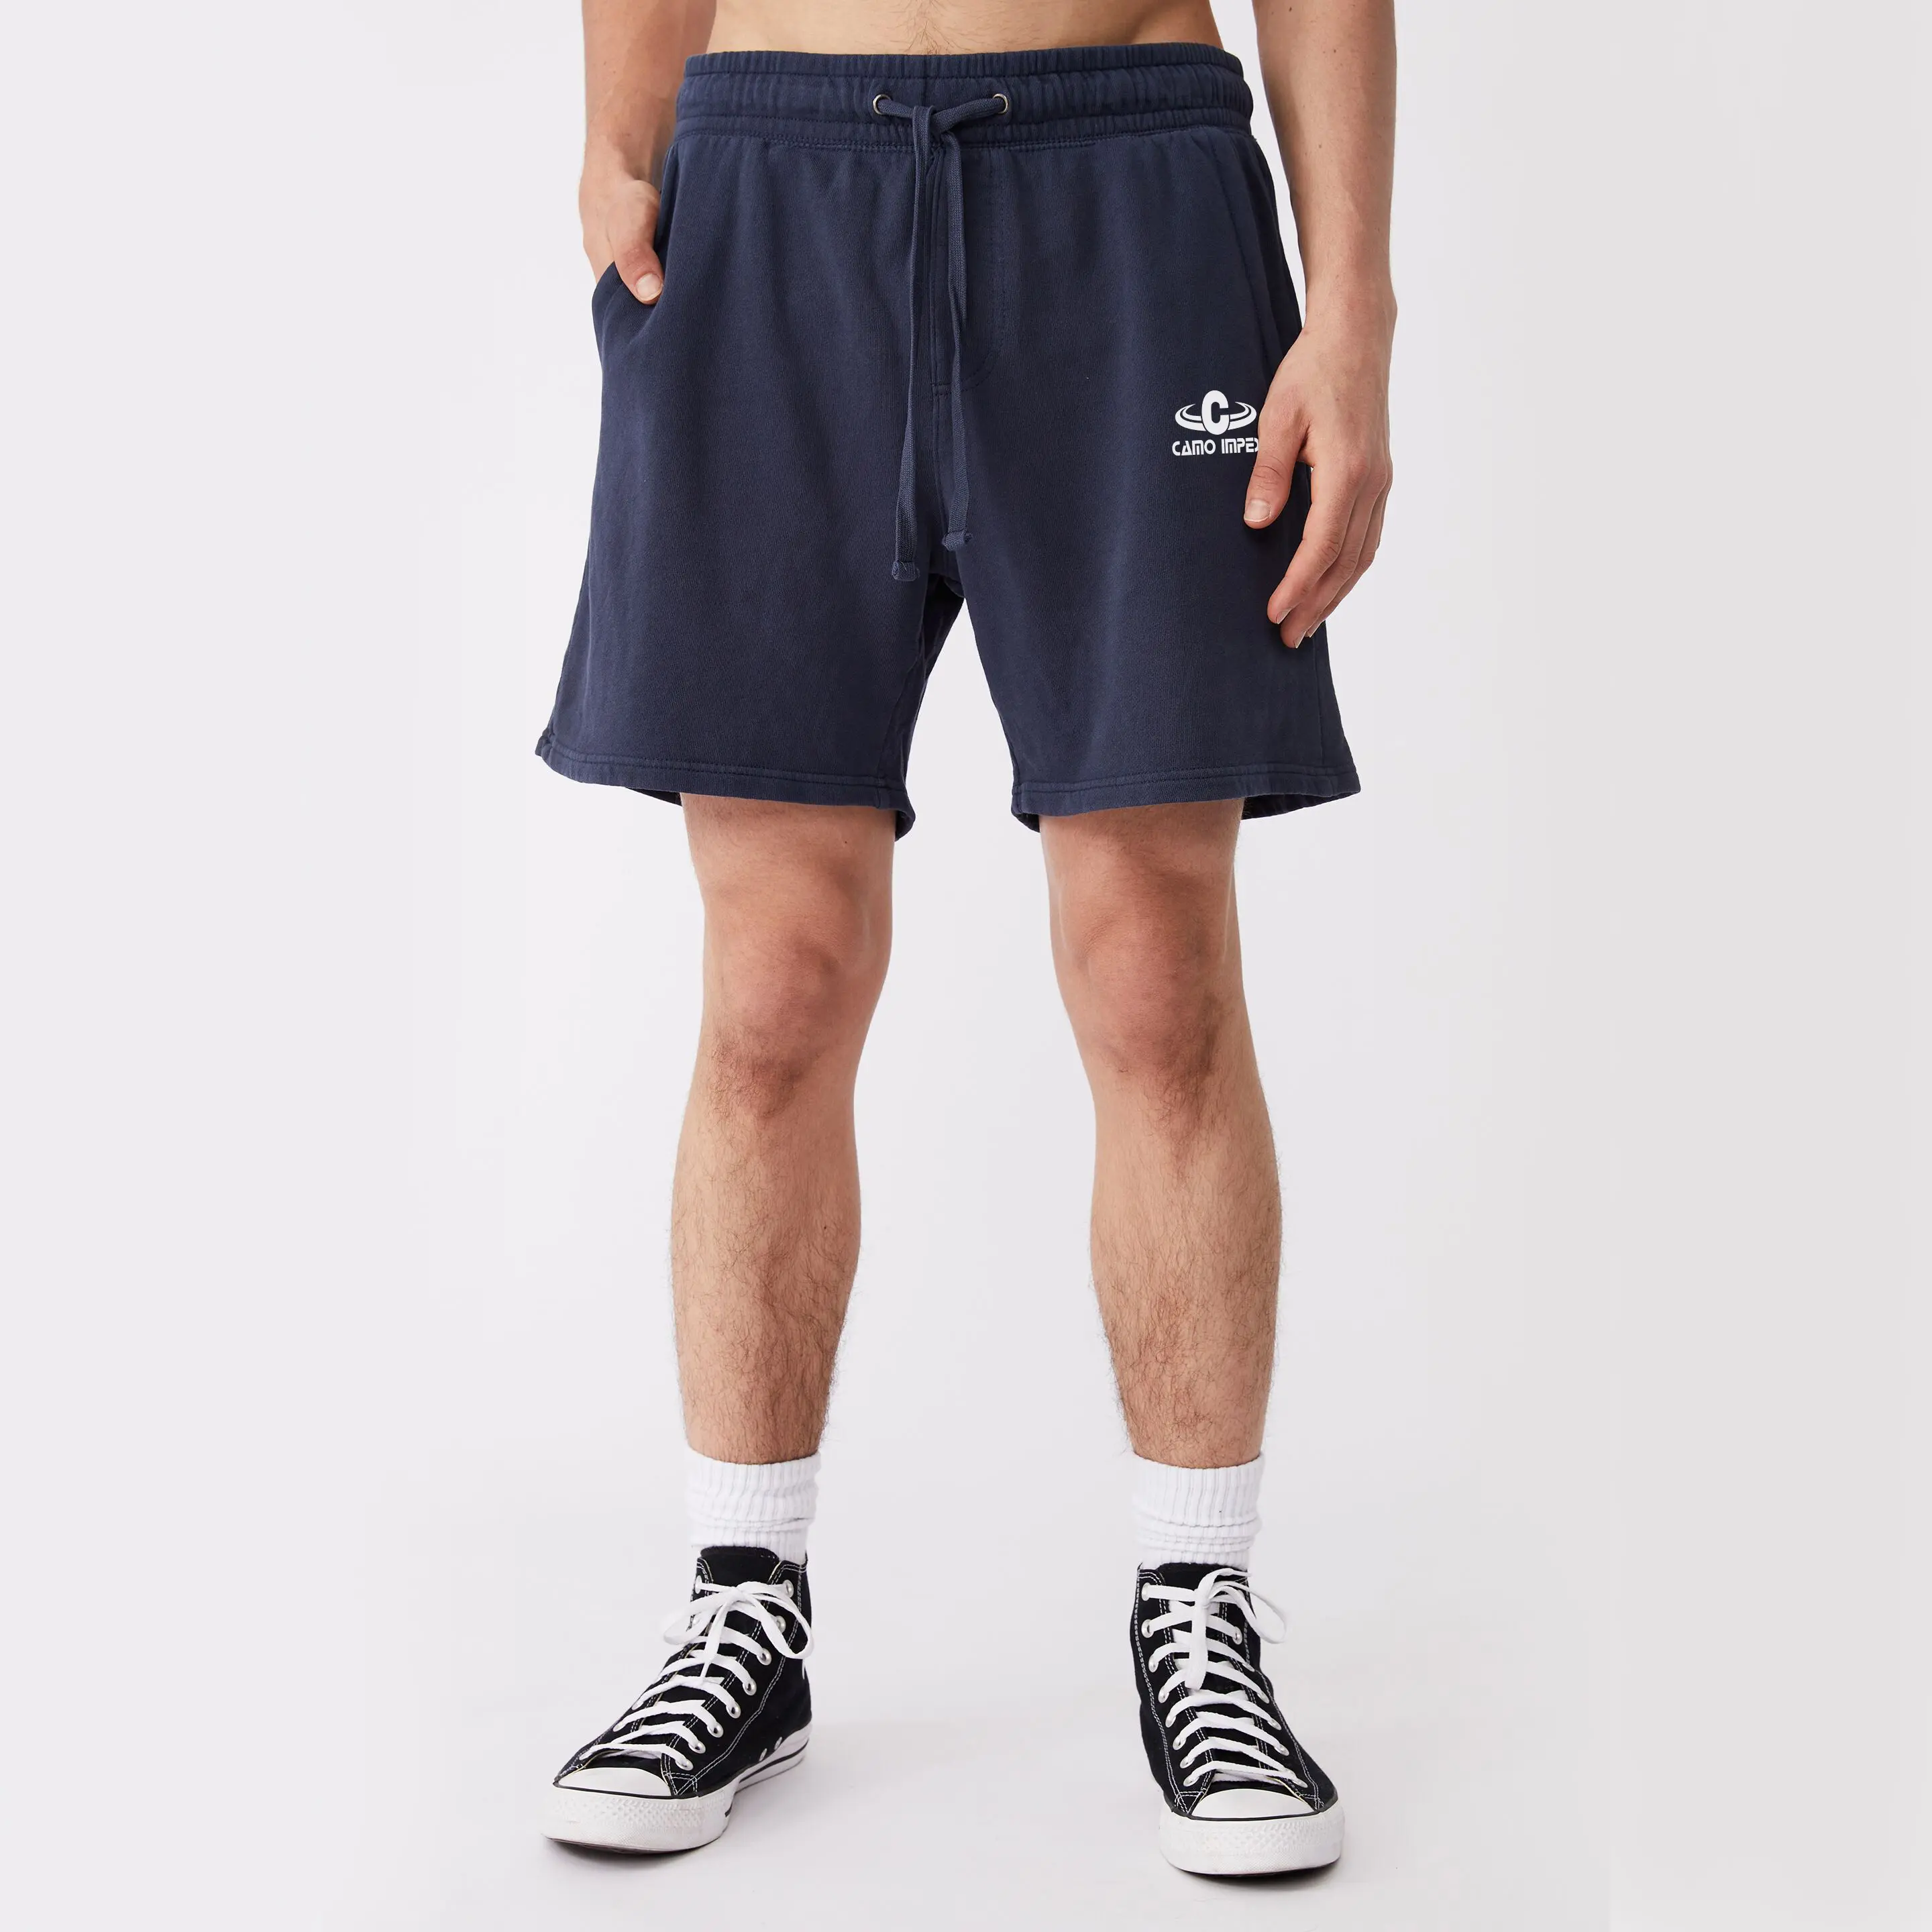 Men Cheap Basketball Clearance Bucks Hot Men Printed Elastic Waist Easy Casual Men's Shorts With Your Own Manufactured By CI